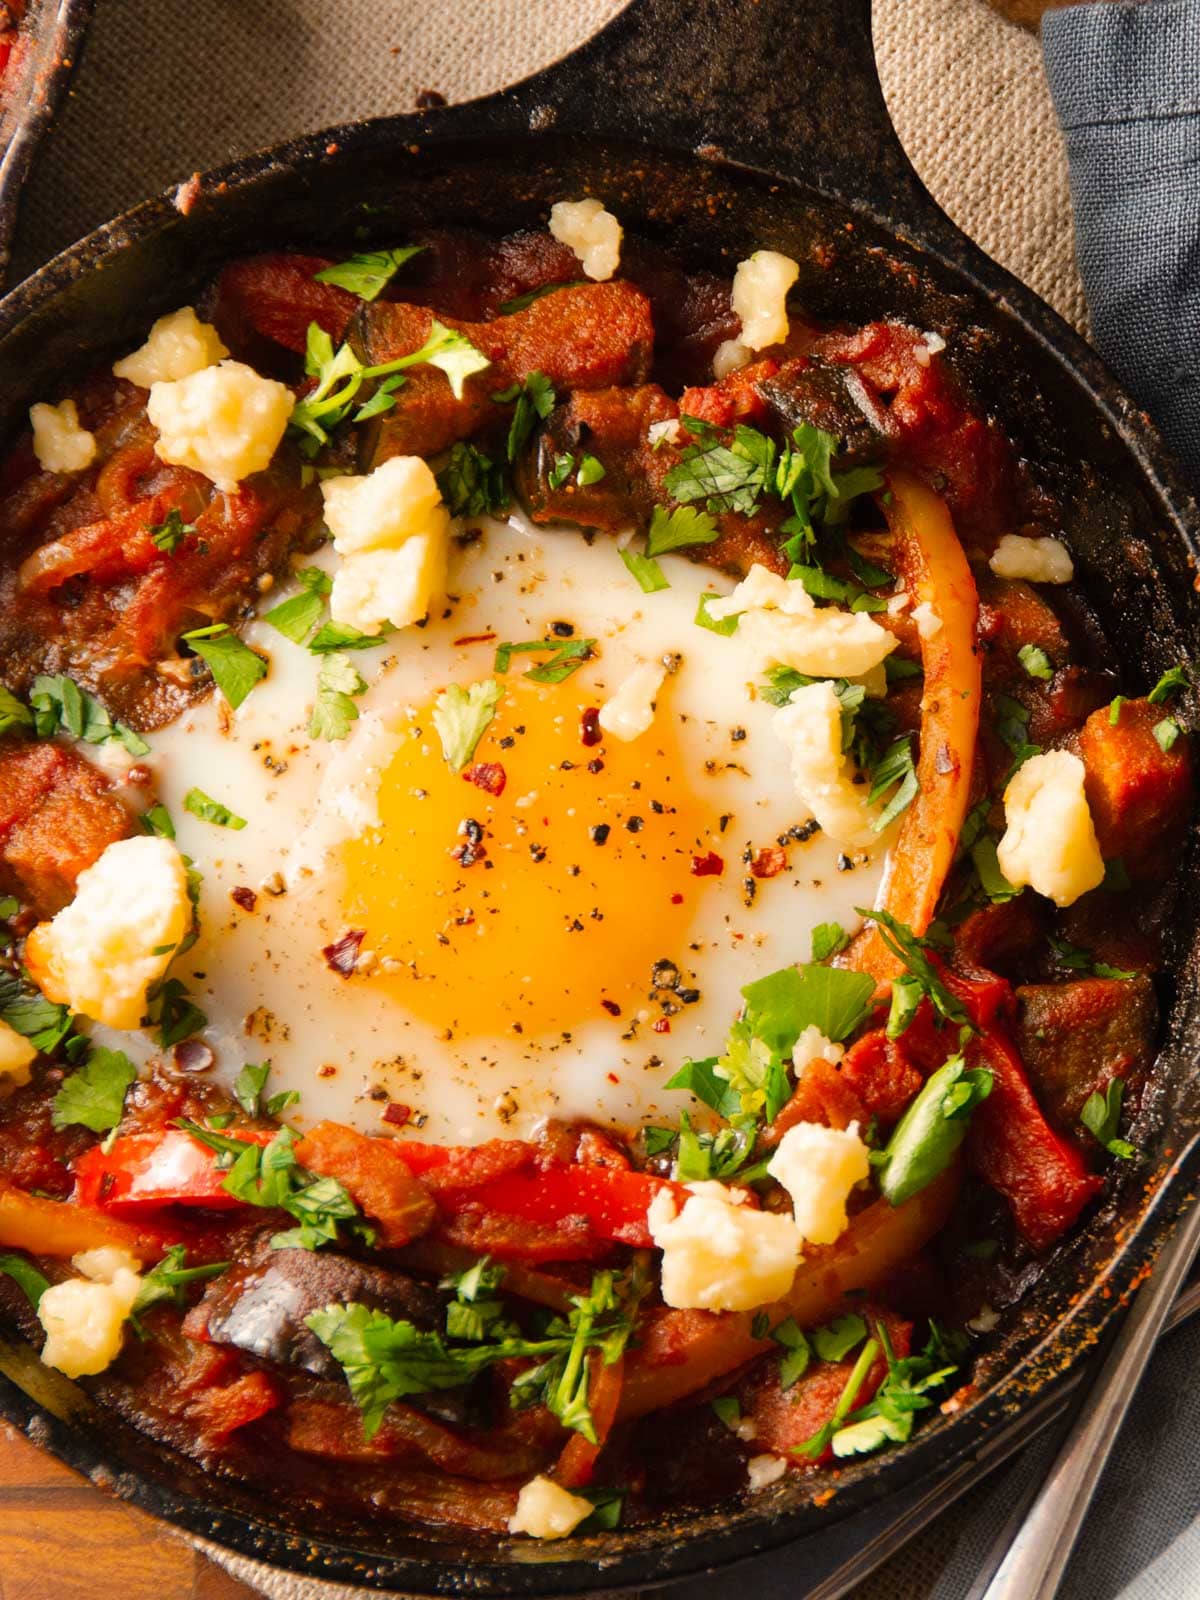 shakshuka eggs with smoked paprika - Lost in Food